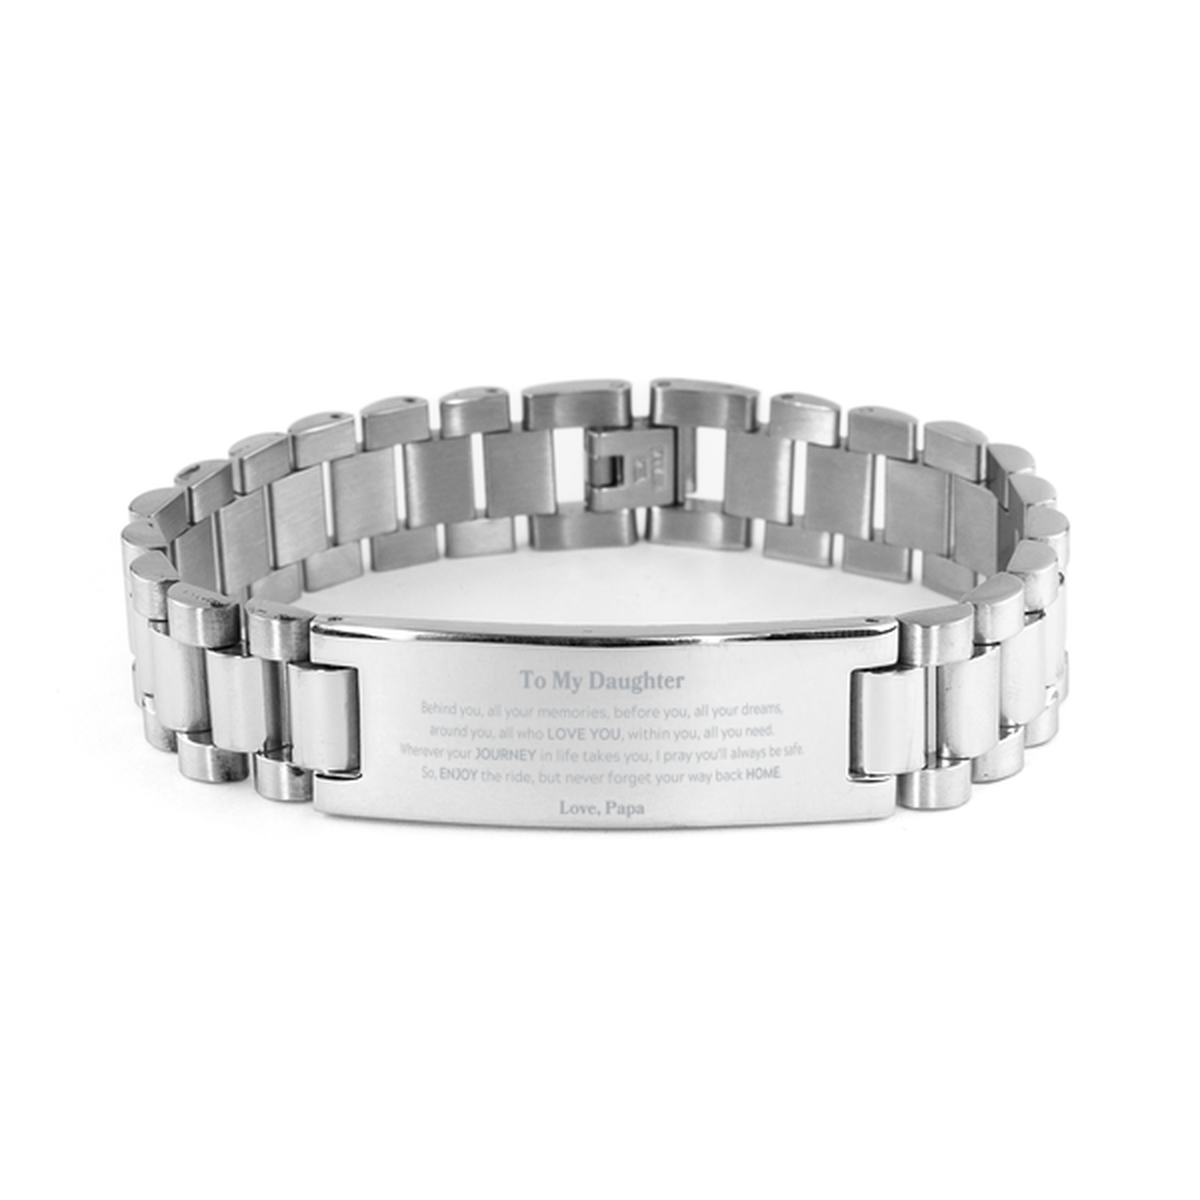 To My Daughter Graduation Gifts from Papa, Daughter Ladder Stainless Steel Bracelet Christmas Birthday Gifts for Daughter Behind you, all your memories, before you, all your dreams. Love, Papa